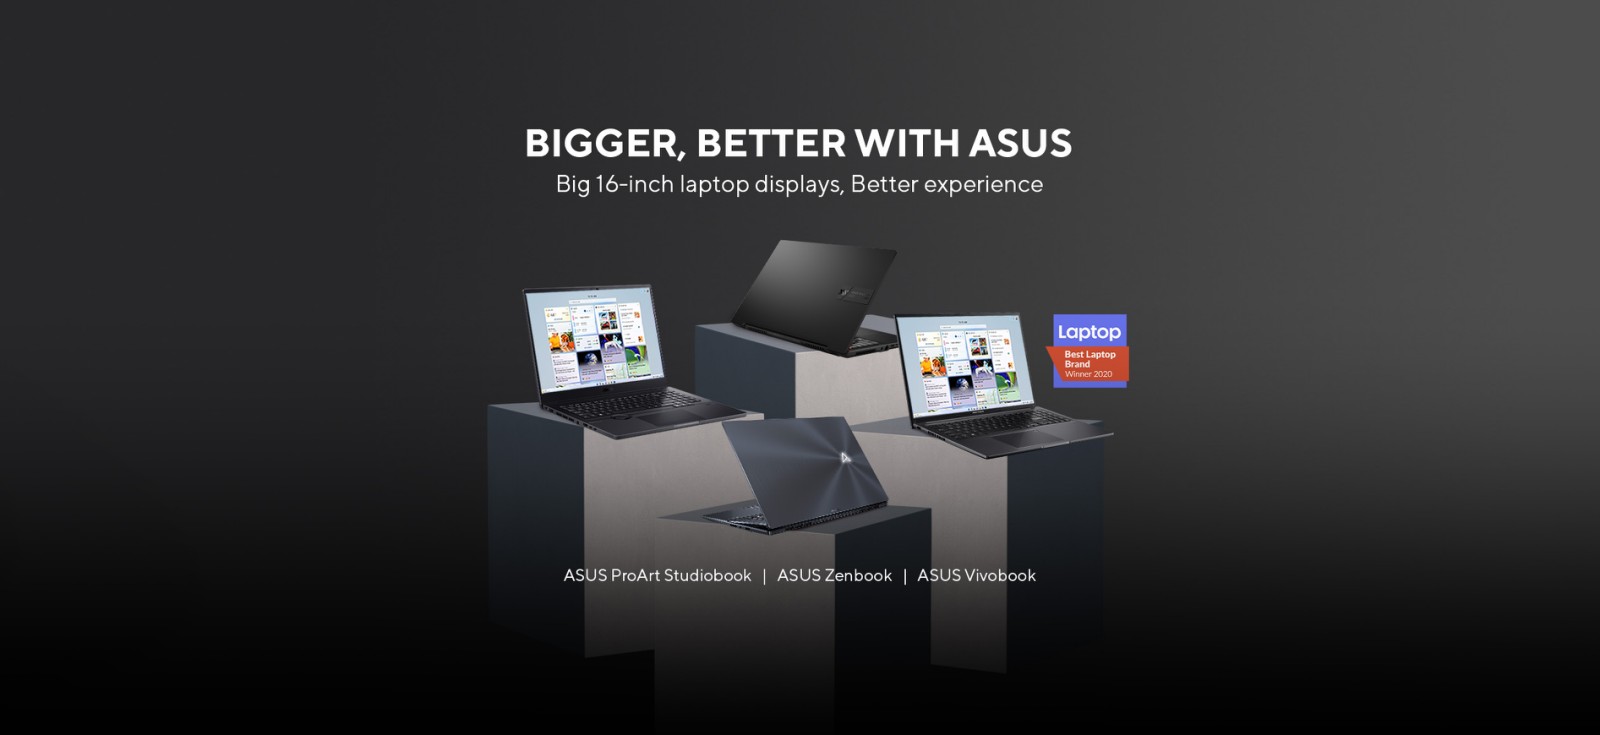 Bigger, Better With ASUS